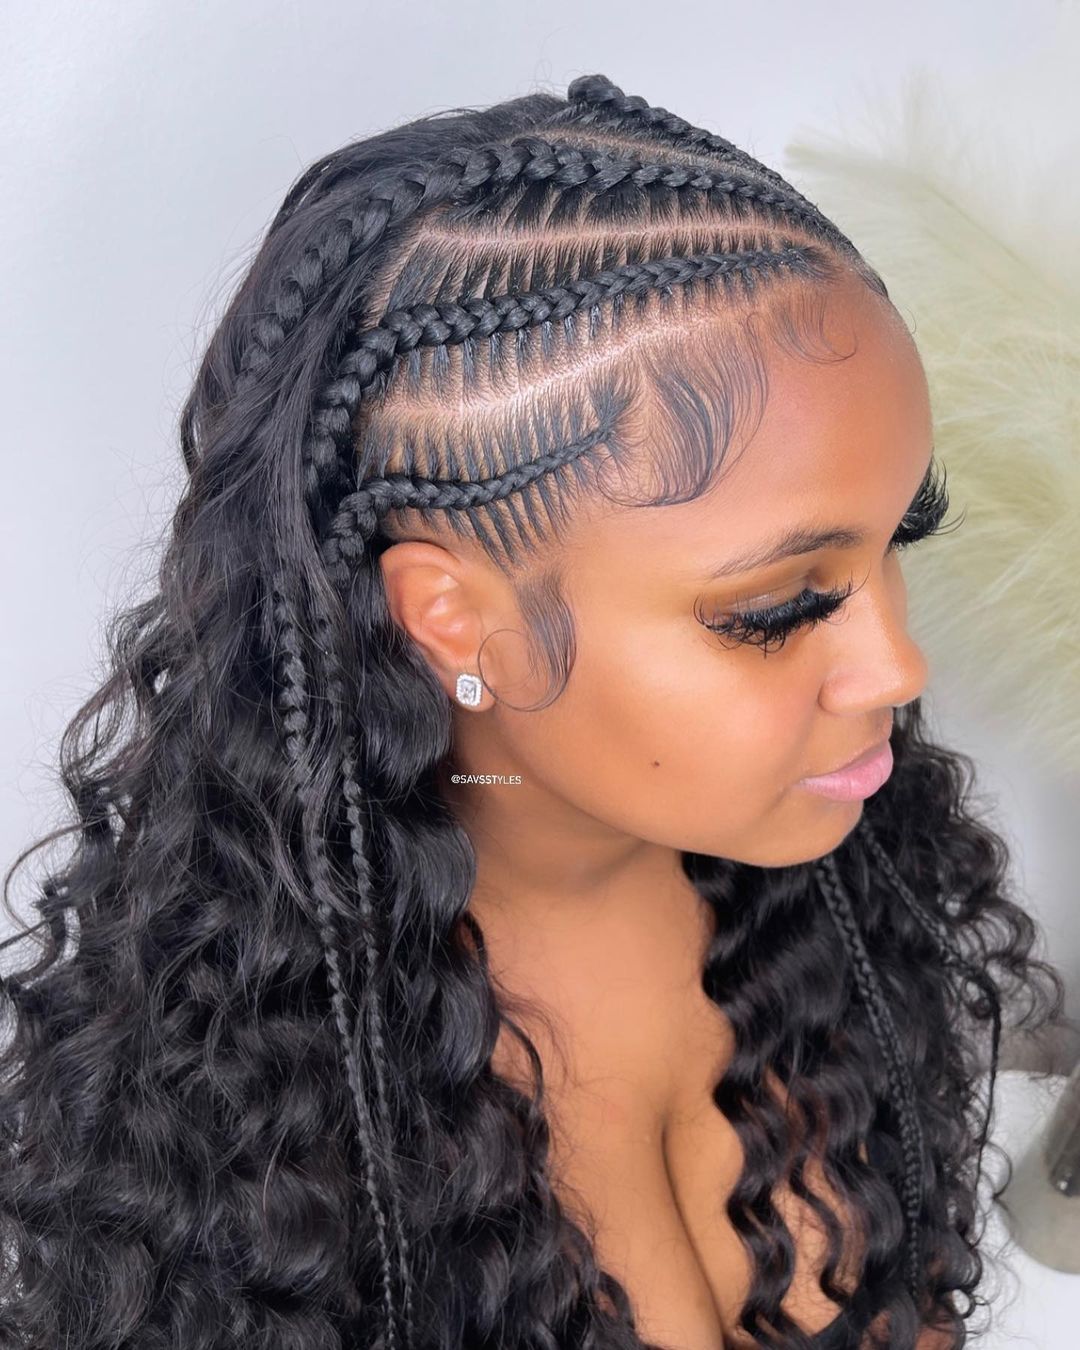 42 Ideas of Stitch Braids for Everyone to Update Your Look - Hairstyle